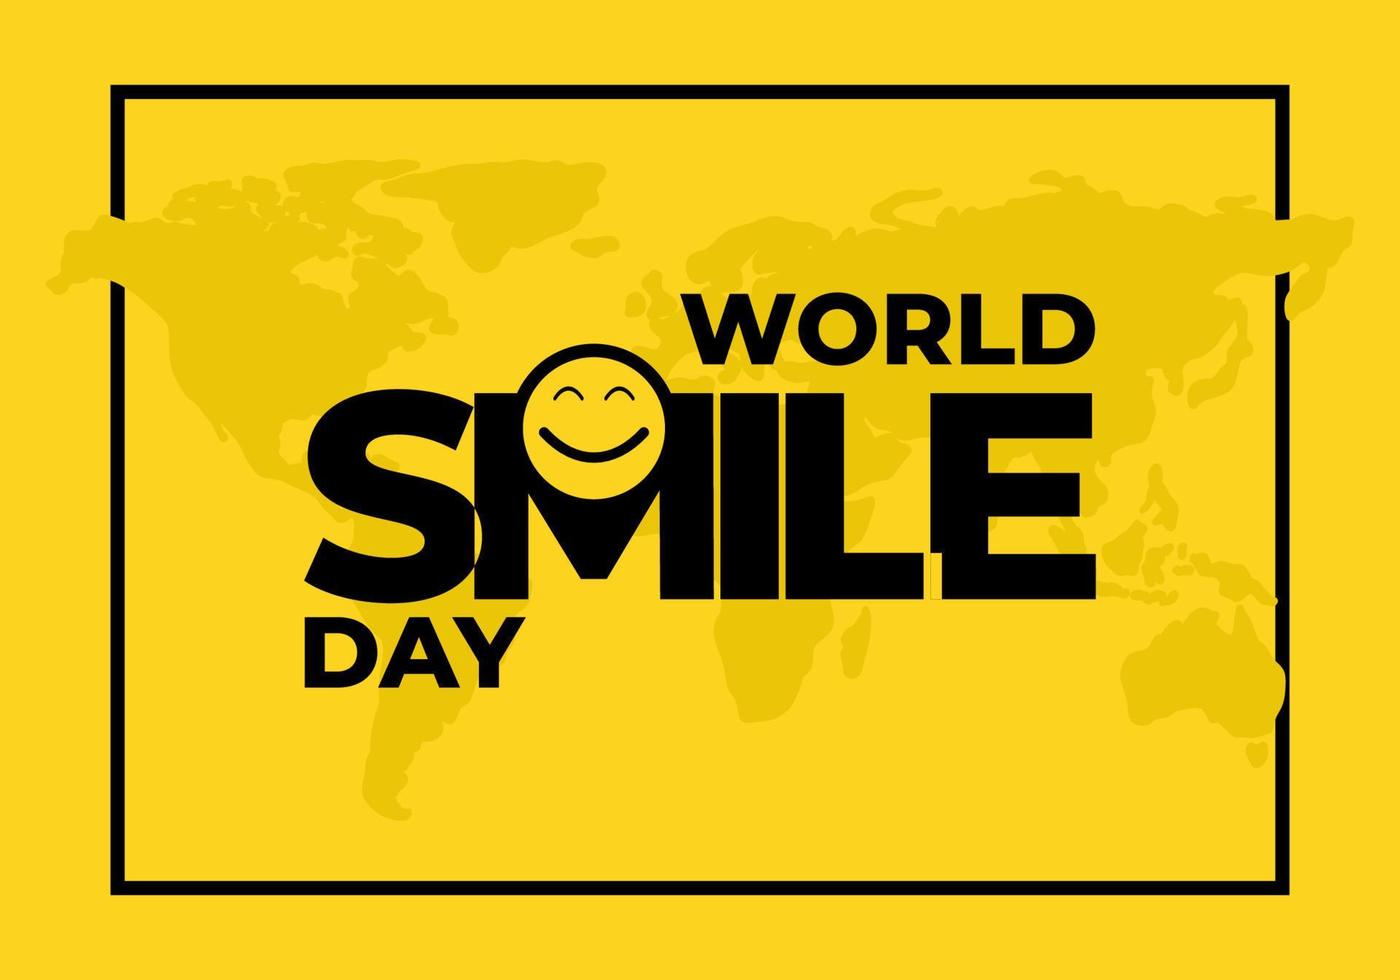 World smile day background banner poster with smiley icon and map vector